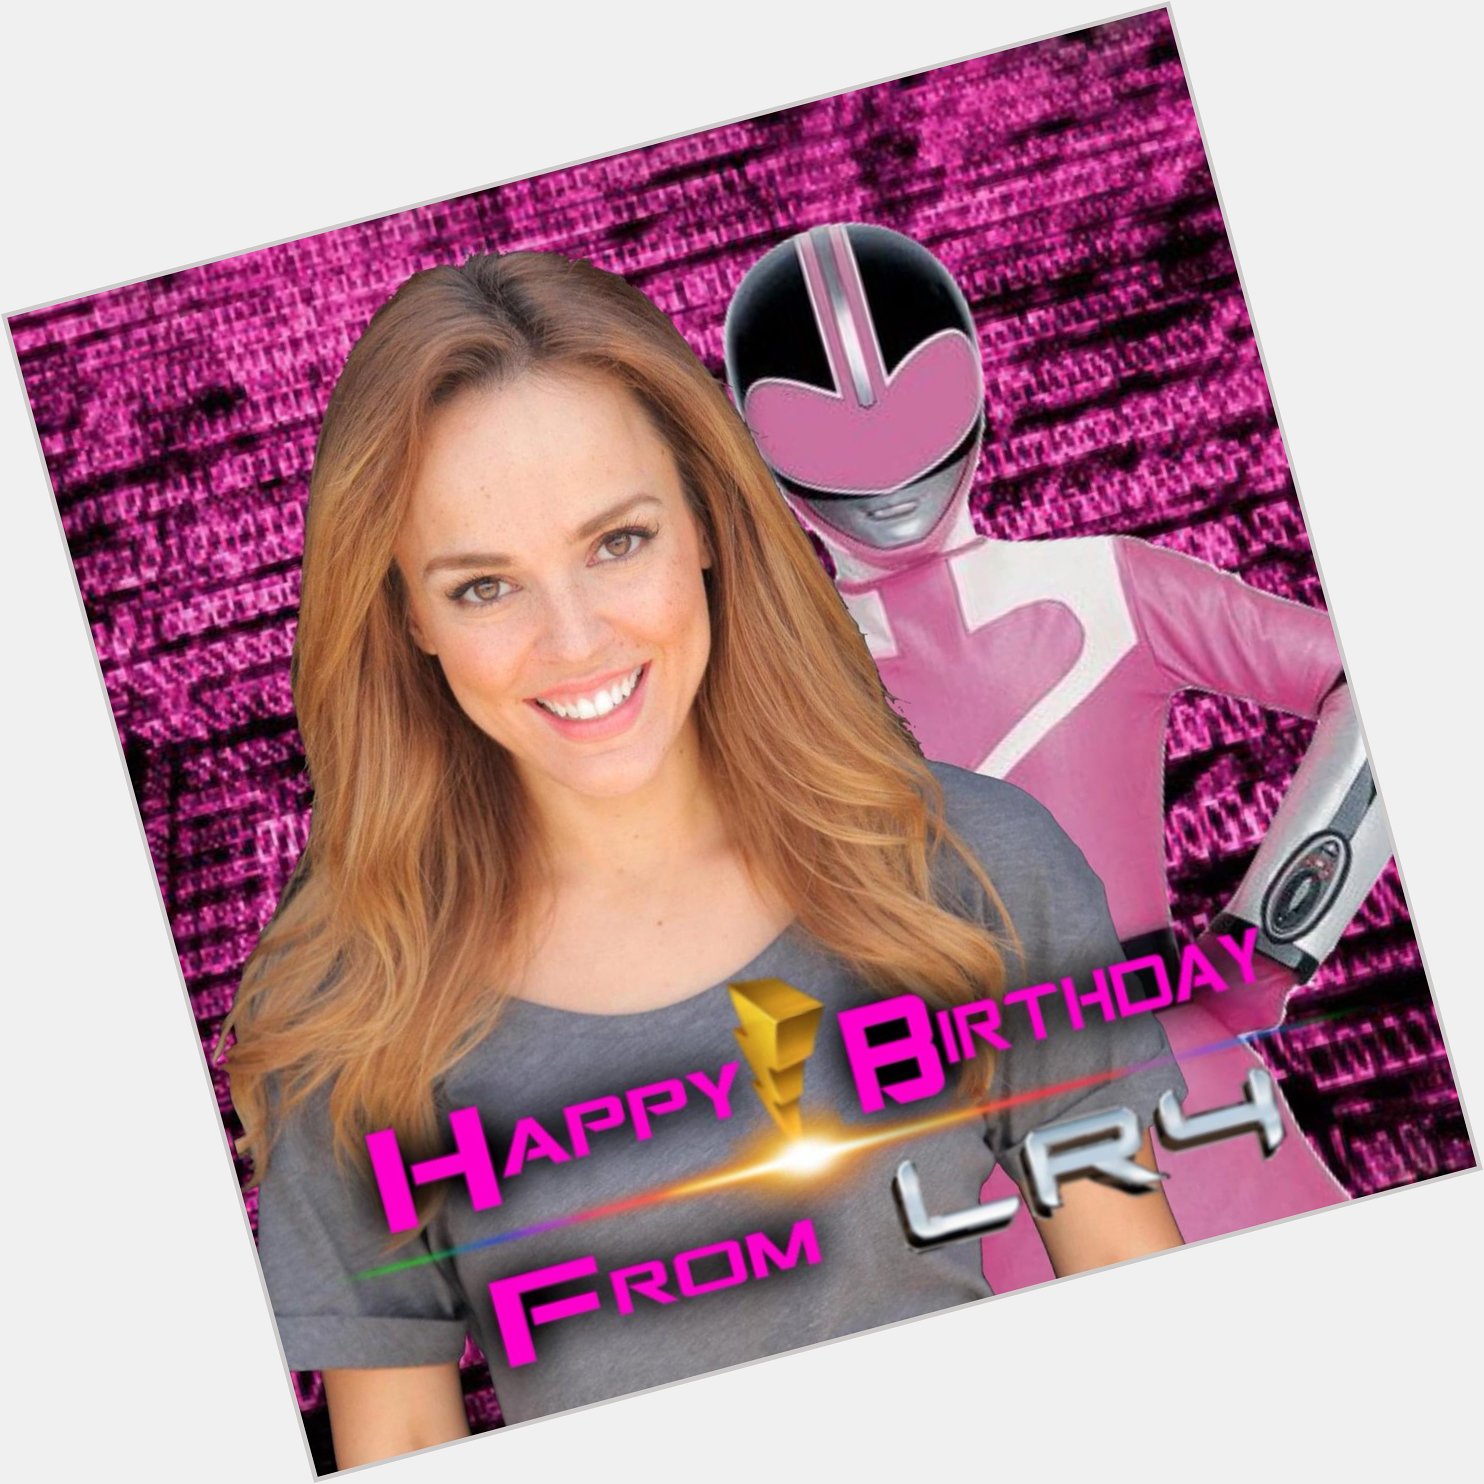 LR4 would like to wish Erin Cahill a Happy Birthday! 